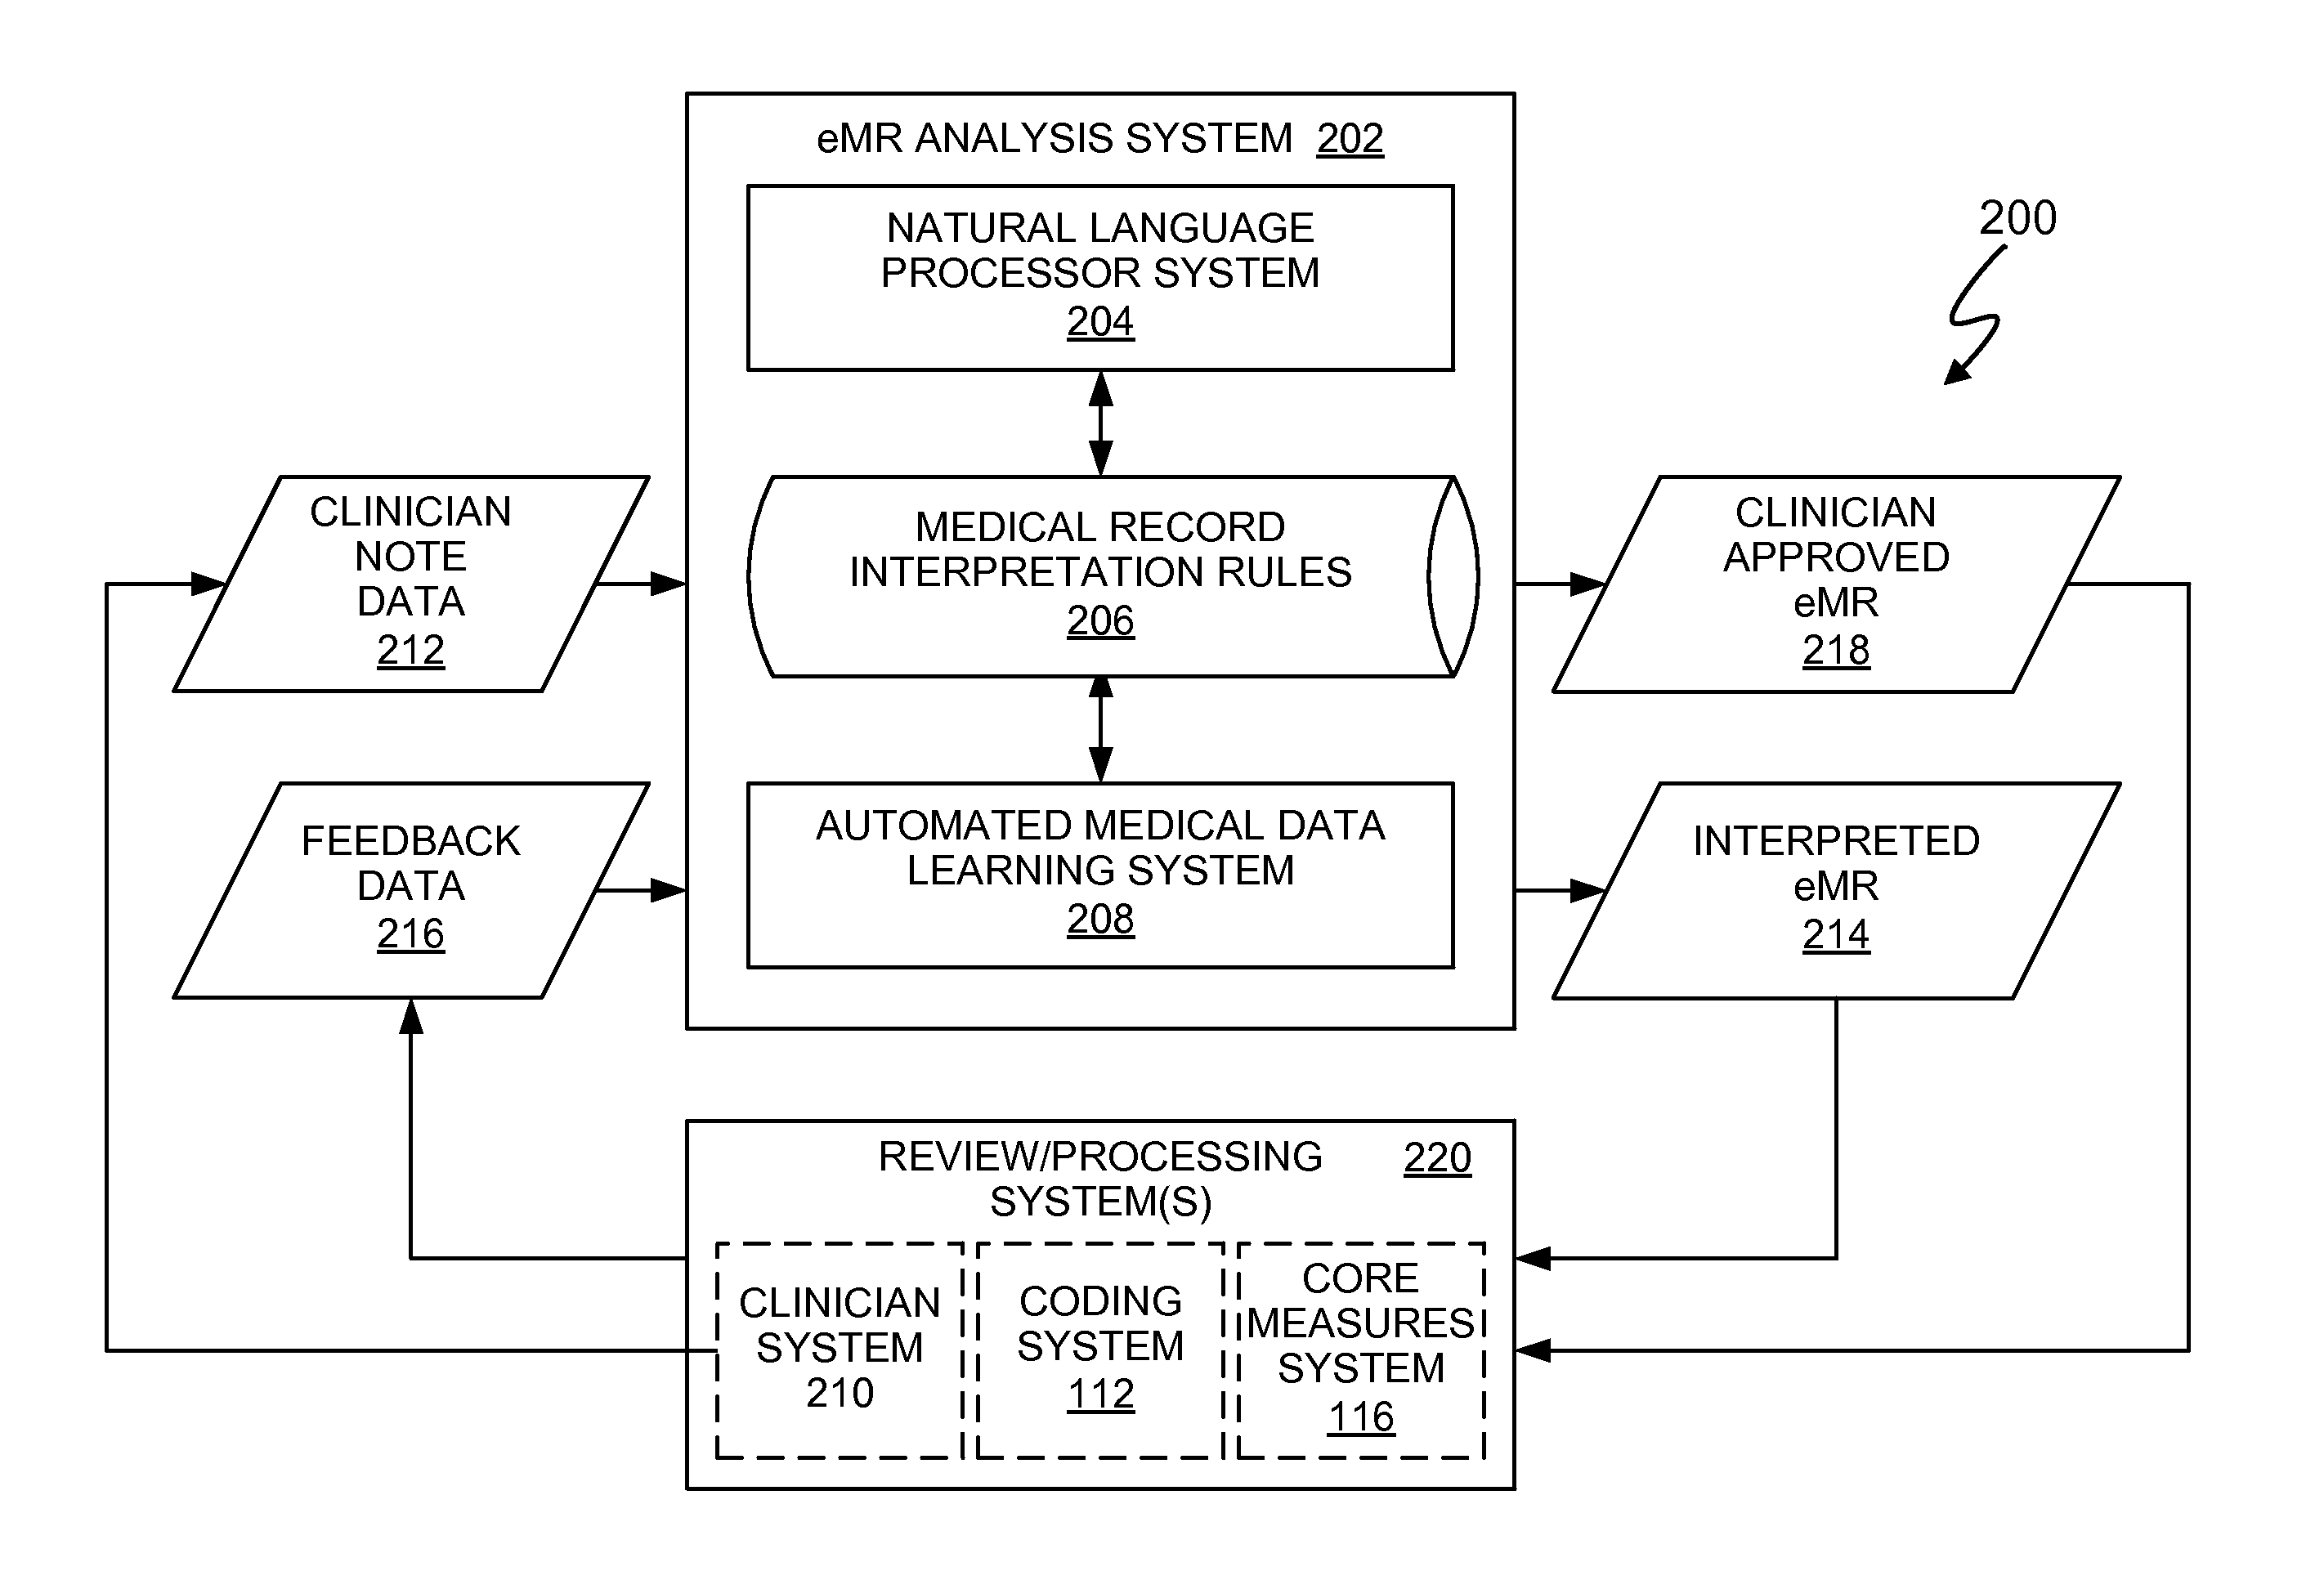 Automated learning for medical data processing system